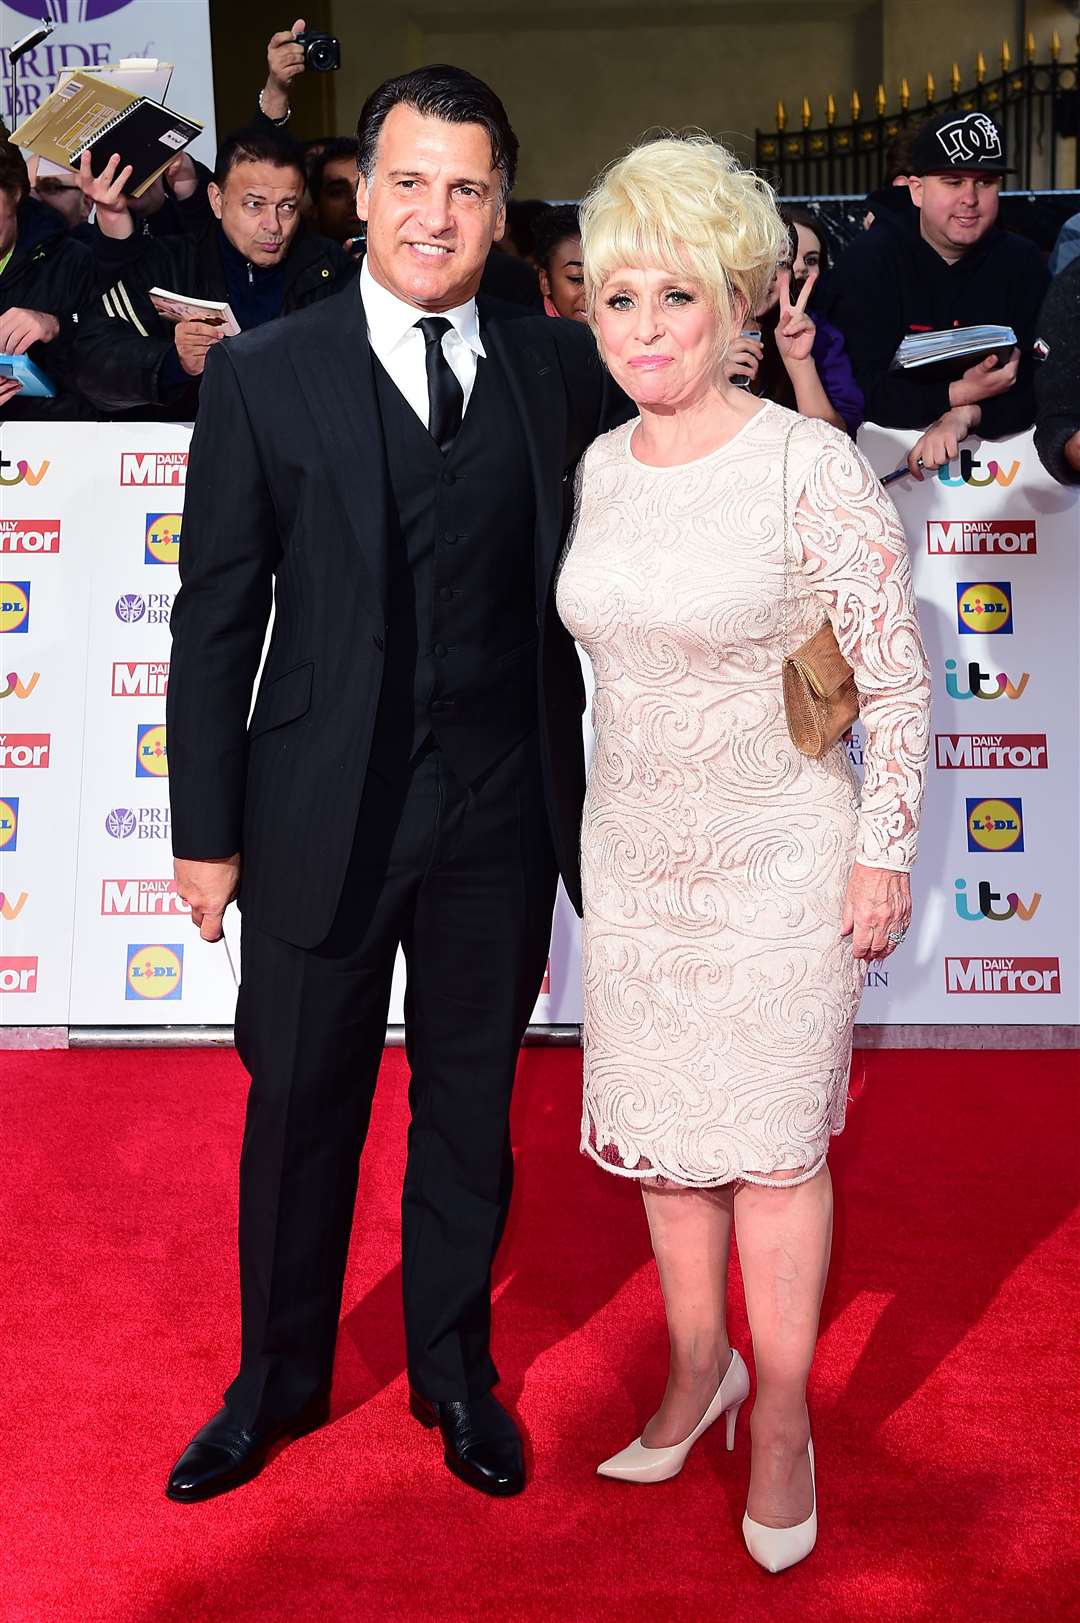 Barbara Windsor and Scott Mitchell arriving for The Pride of Britain Awards 2015 (Ian West/PA)